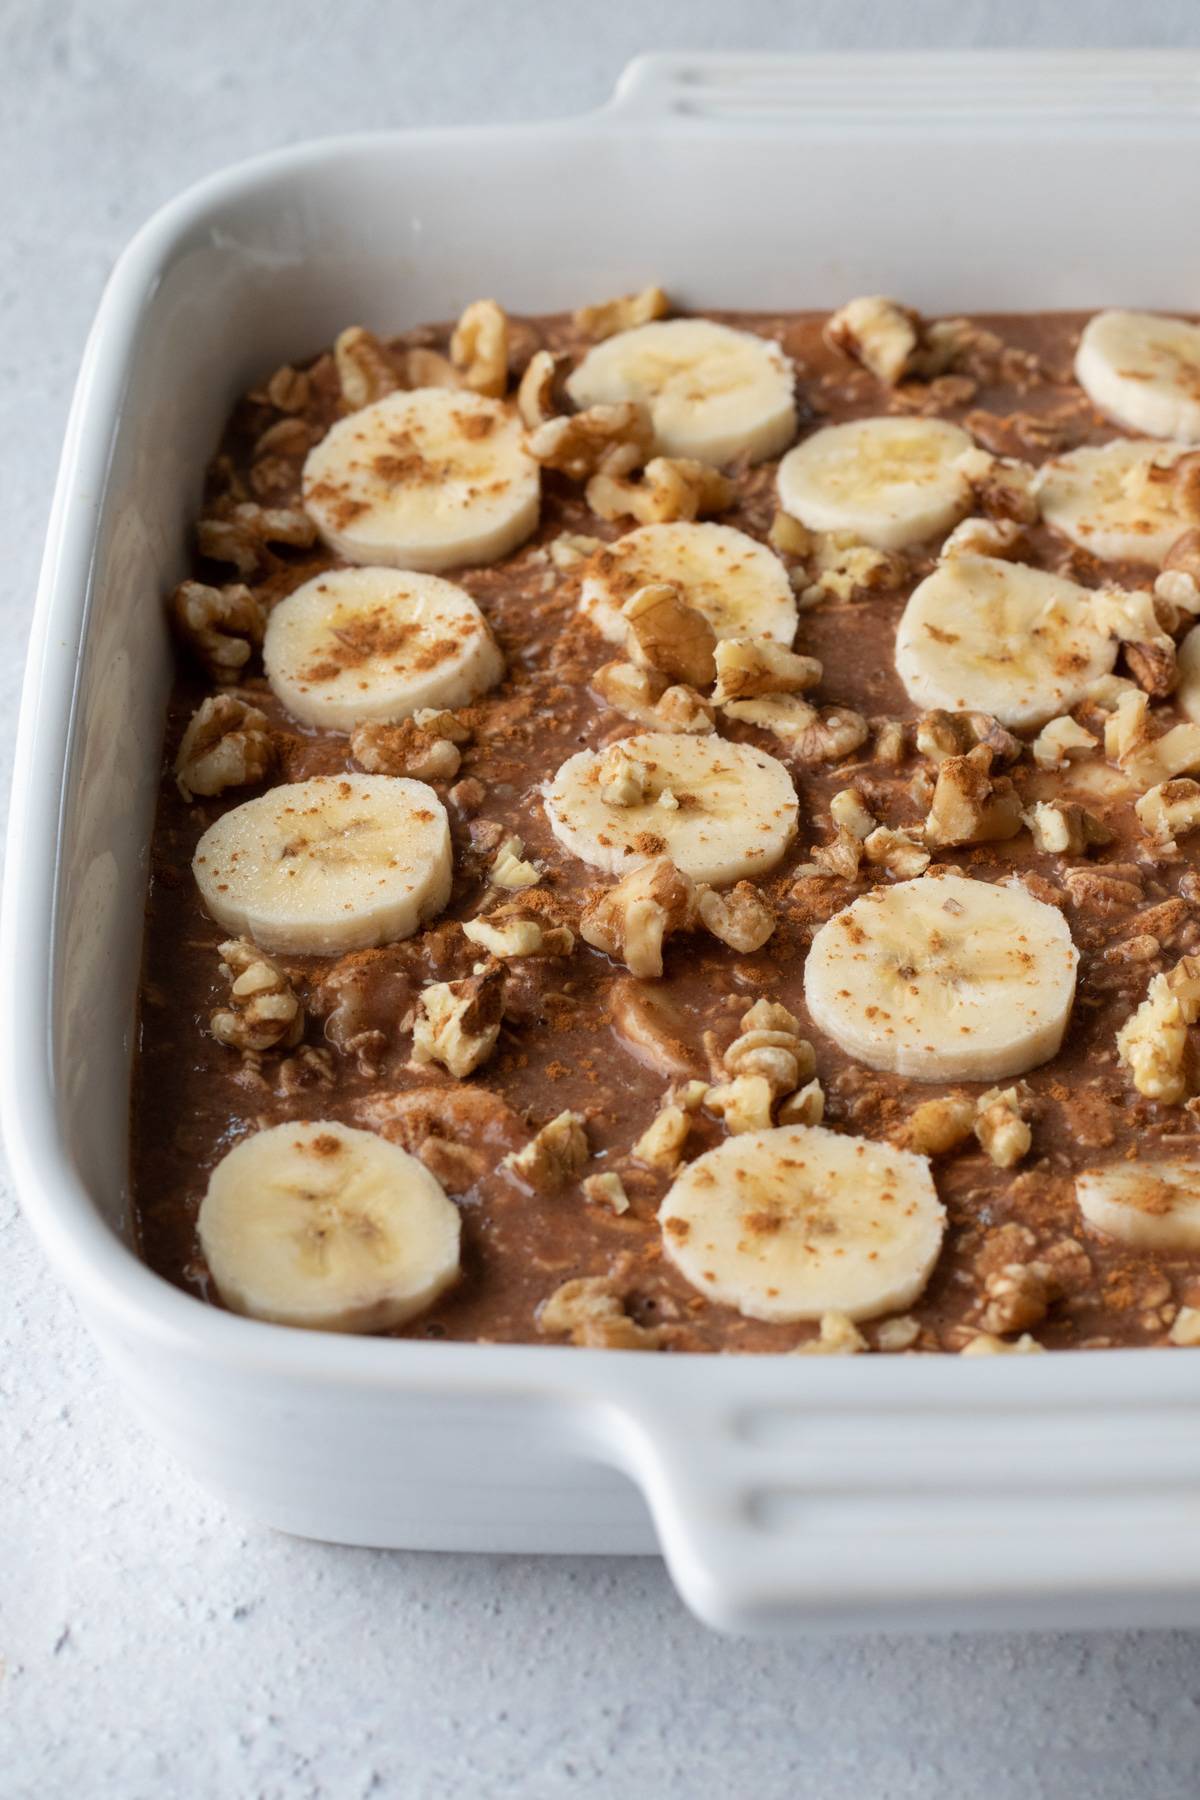 before baking, oatmeal mixture topped with slices of banana and crumbled walnuts.